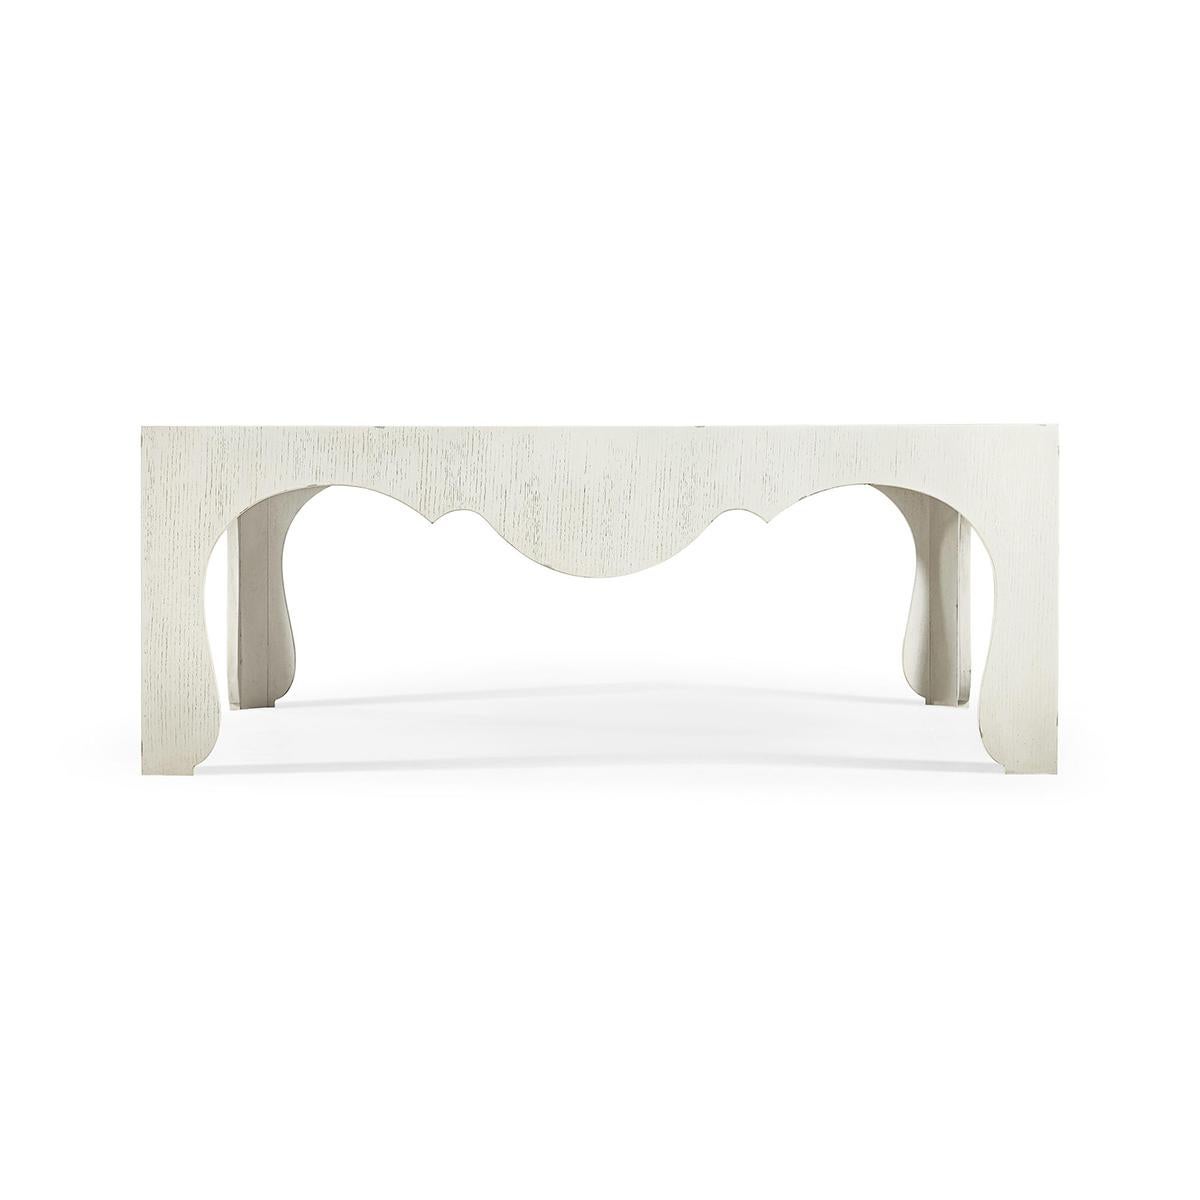 Crafted with artistic precision, this table features unique serpentine edges and subtle cut-out details that give it a flowing, organic appearance. The soft chalk white finish adds a modern touch, enhancing the table’s aesthetic while complementing